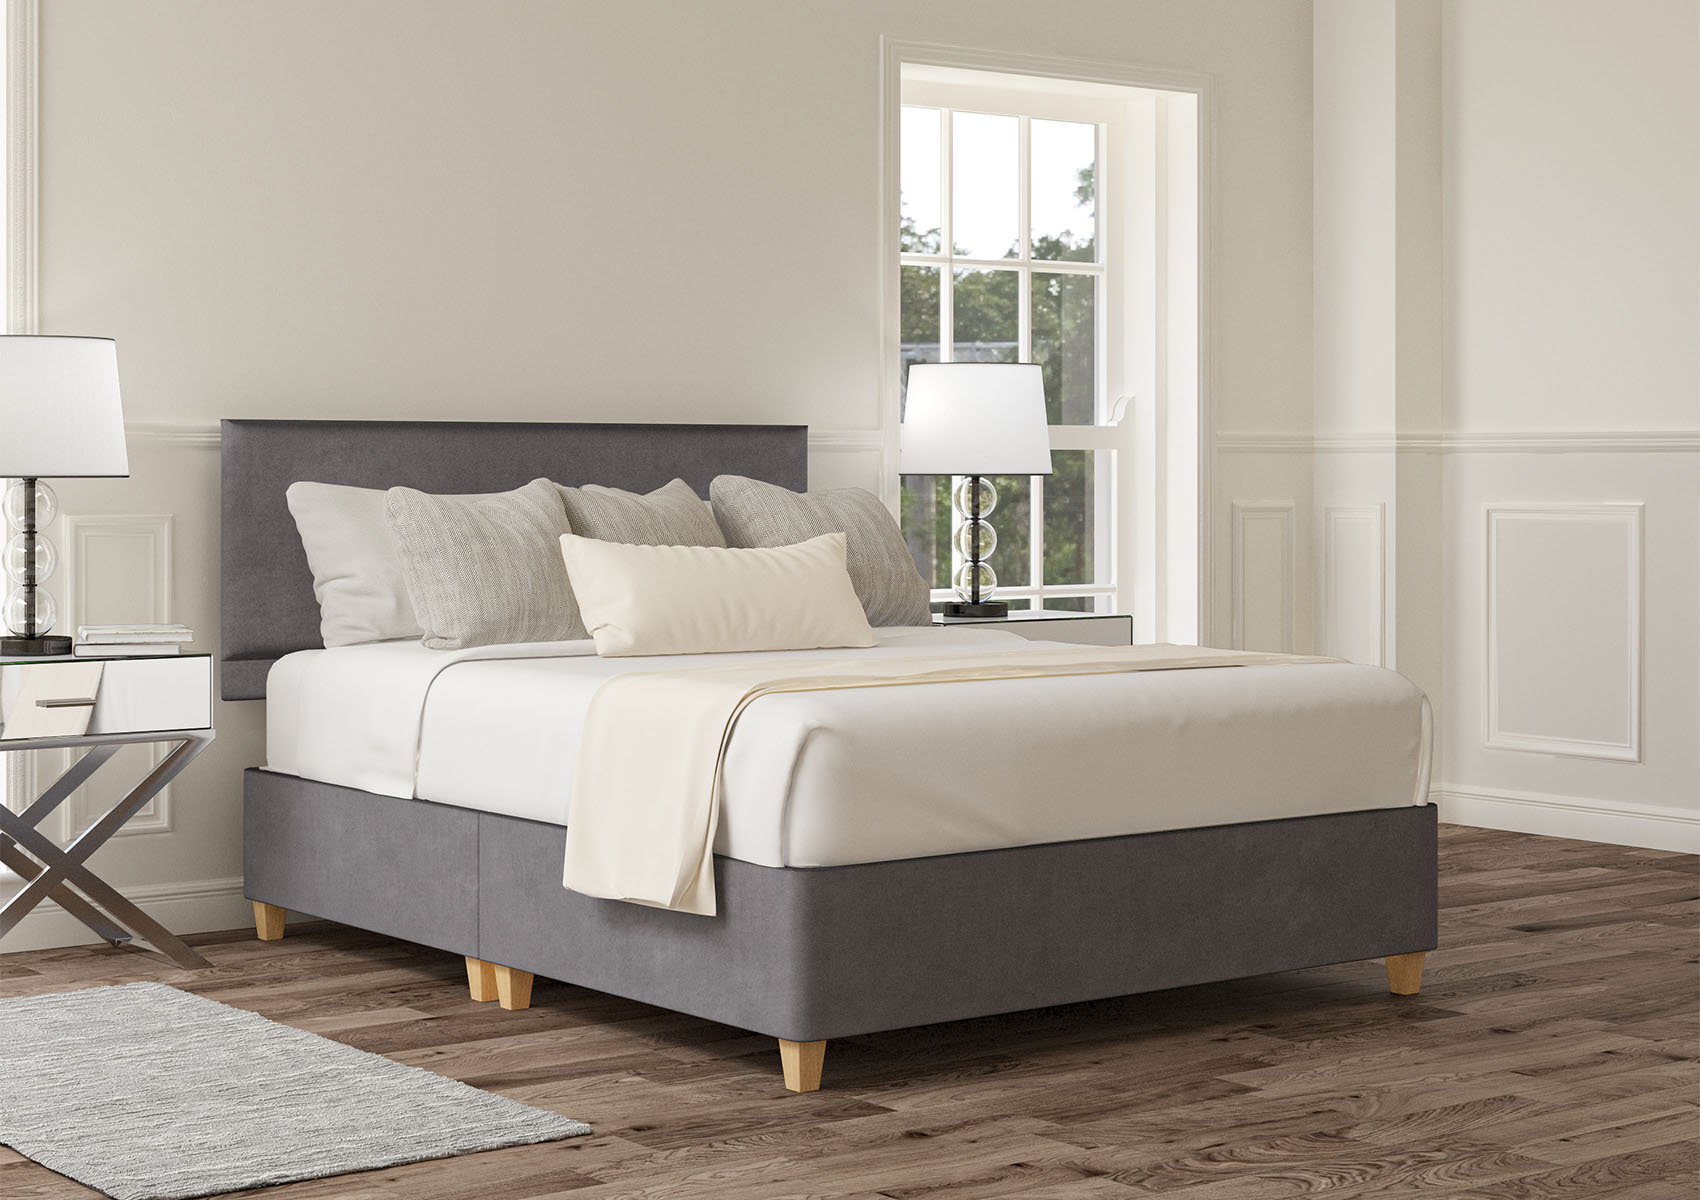 View Henley Plush Silver Upholstered King Size Bed Time4Sleep information